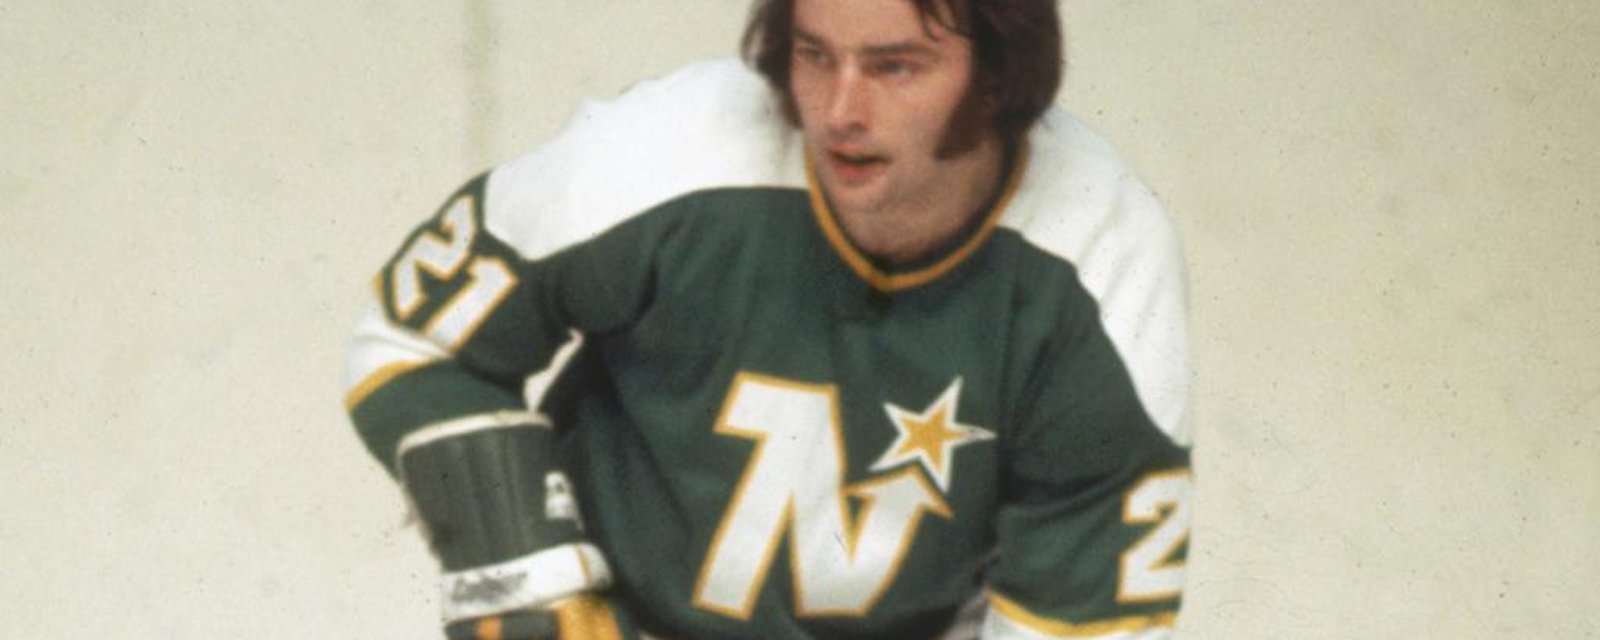 Hockey legend Grant has died at 73 after battle with cancer 